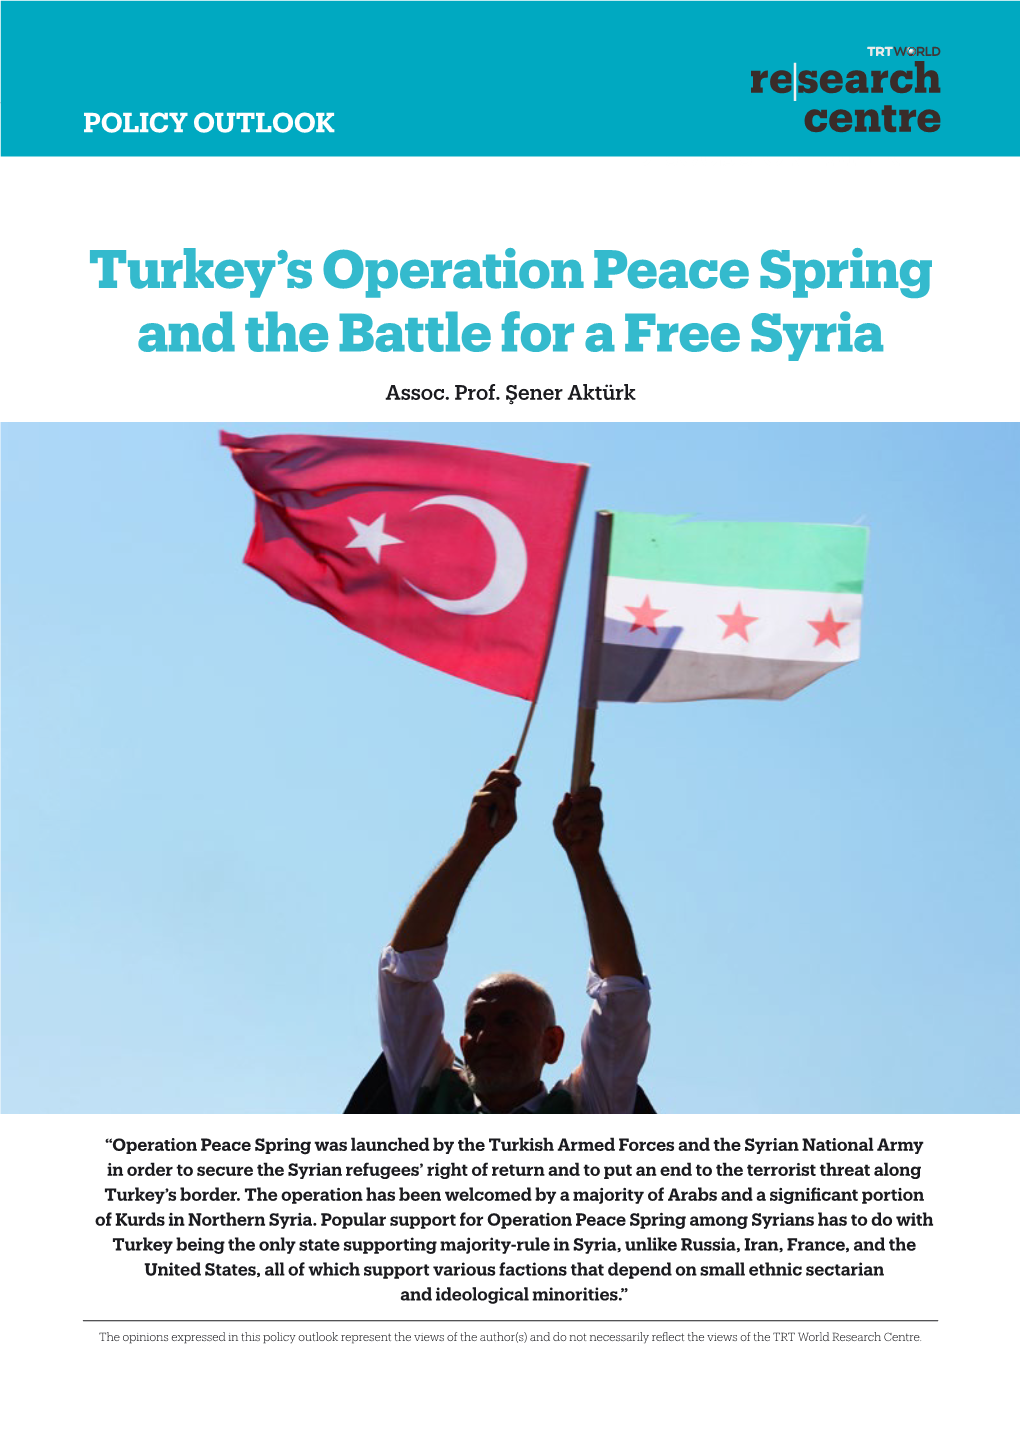 Turkey's Operation Peace Spring and the Battle for a Free Syria